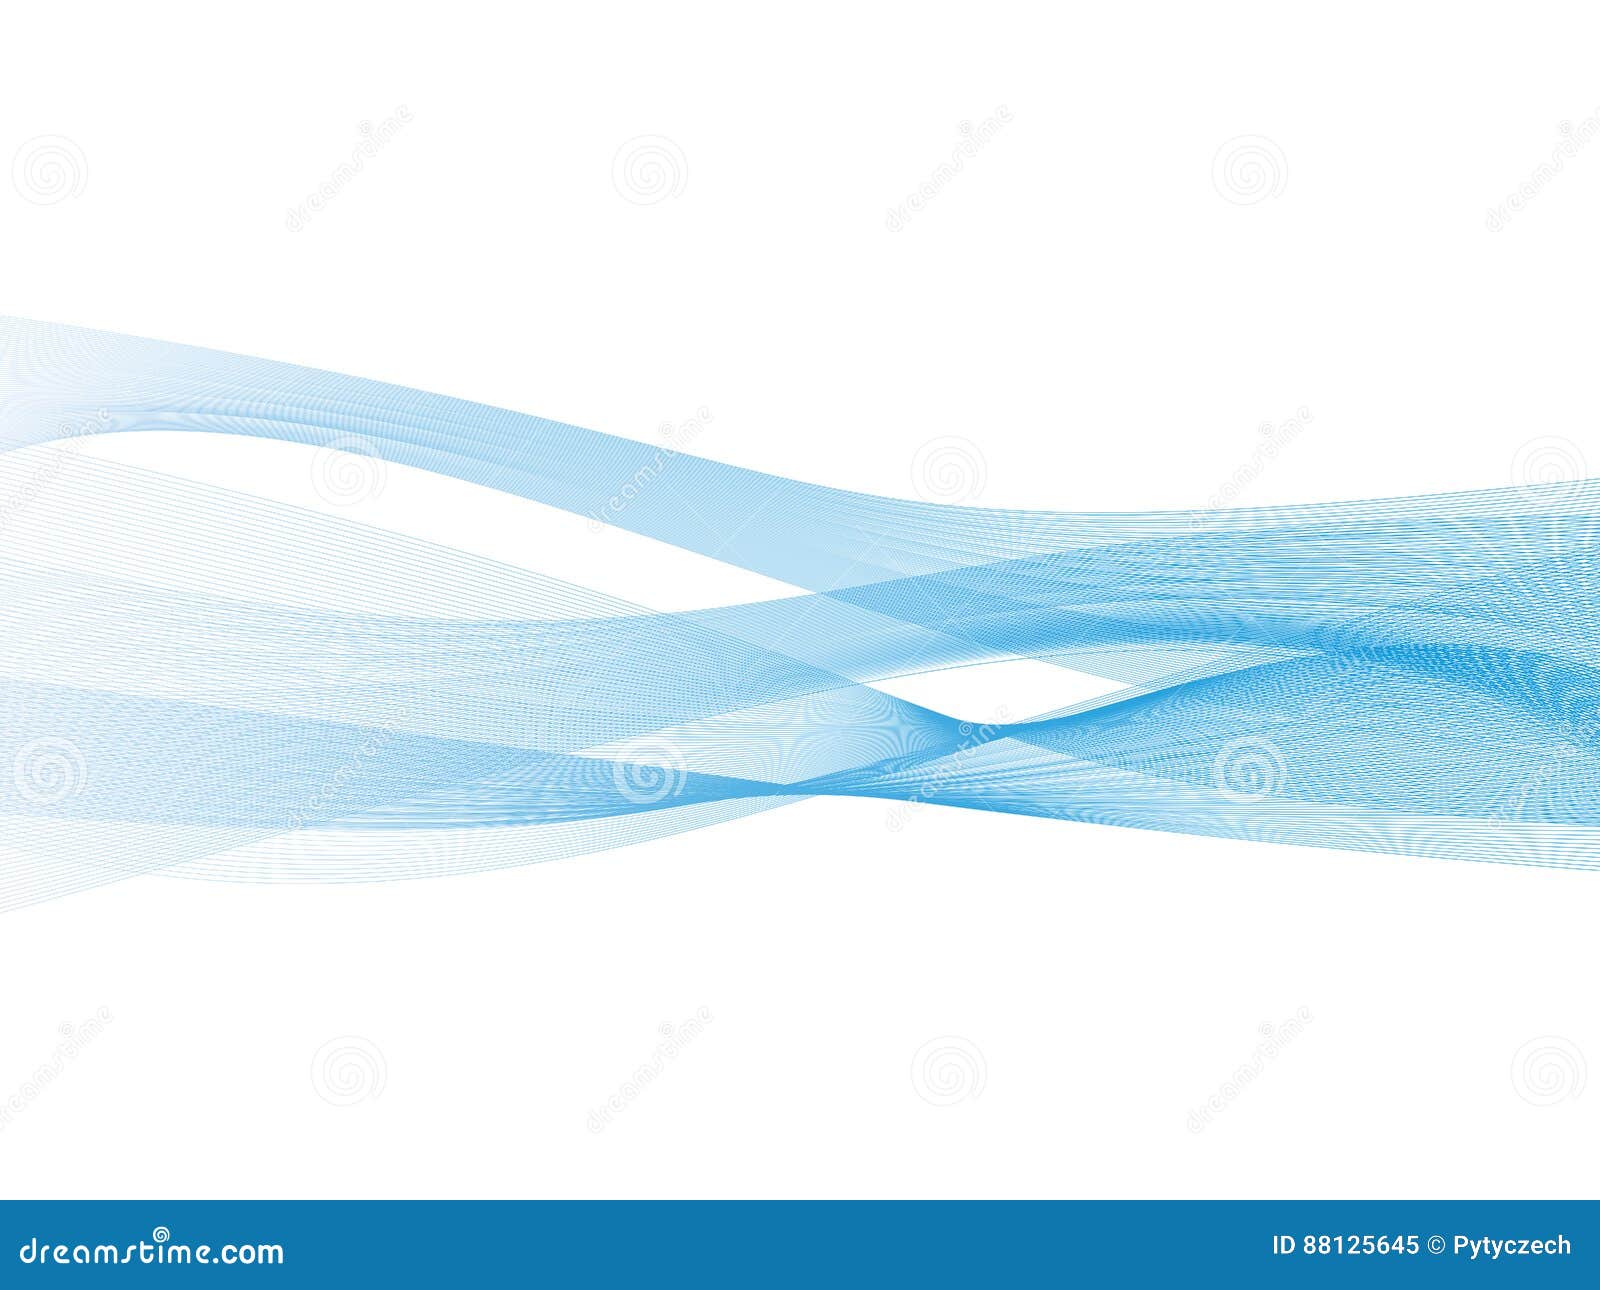 Abstract Transparent Blue Wave Background Smoke Effect Design